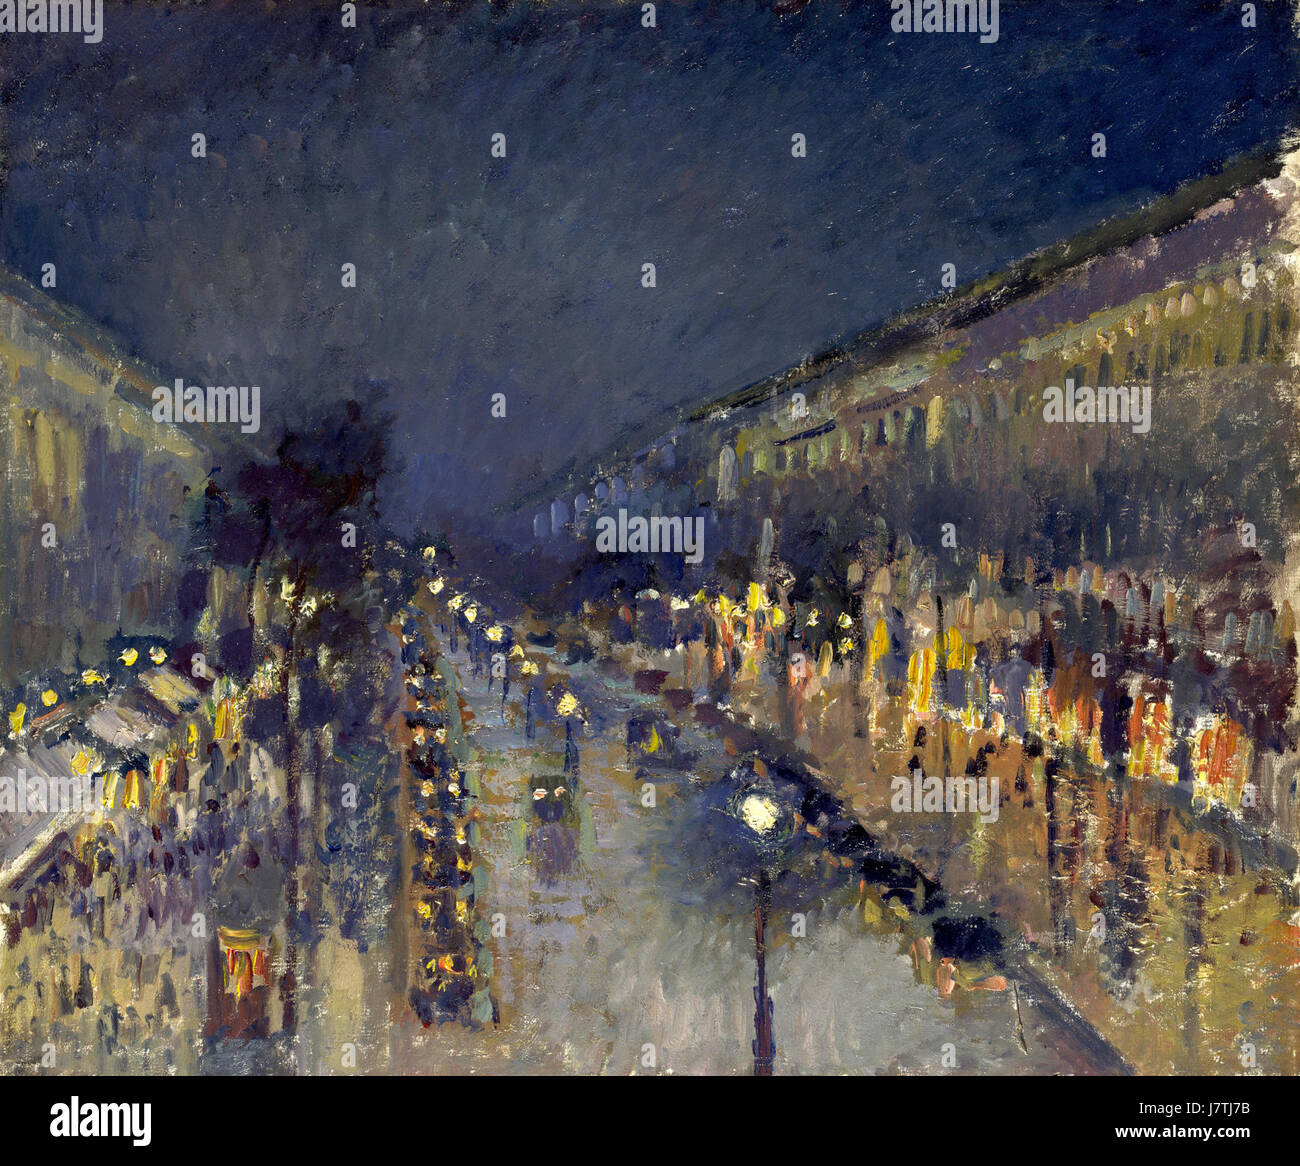 Camille Pissarro, The Boulevard Montmartre at Night, 1897 Stock Photo